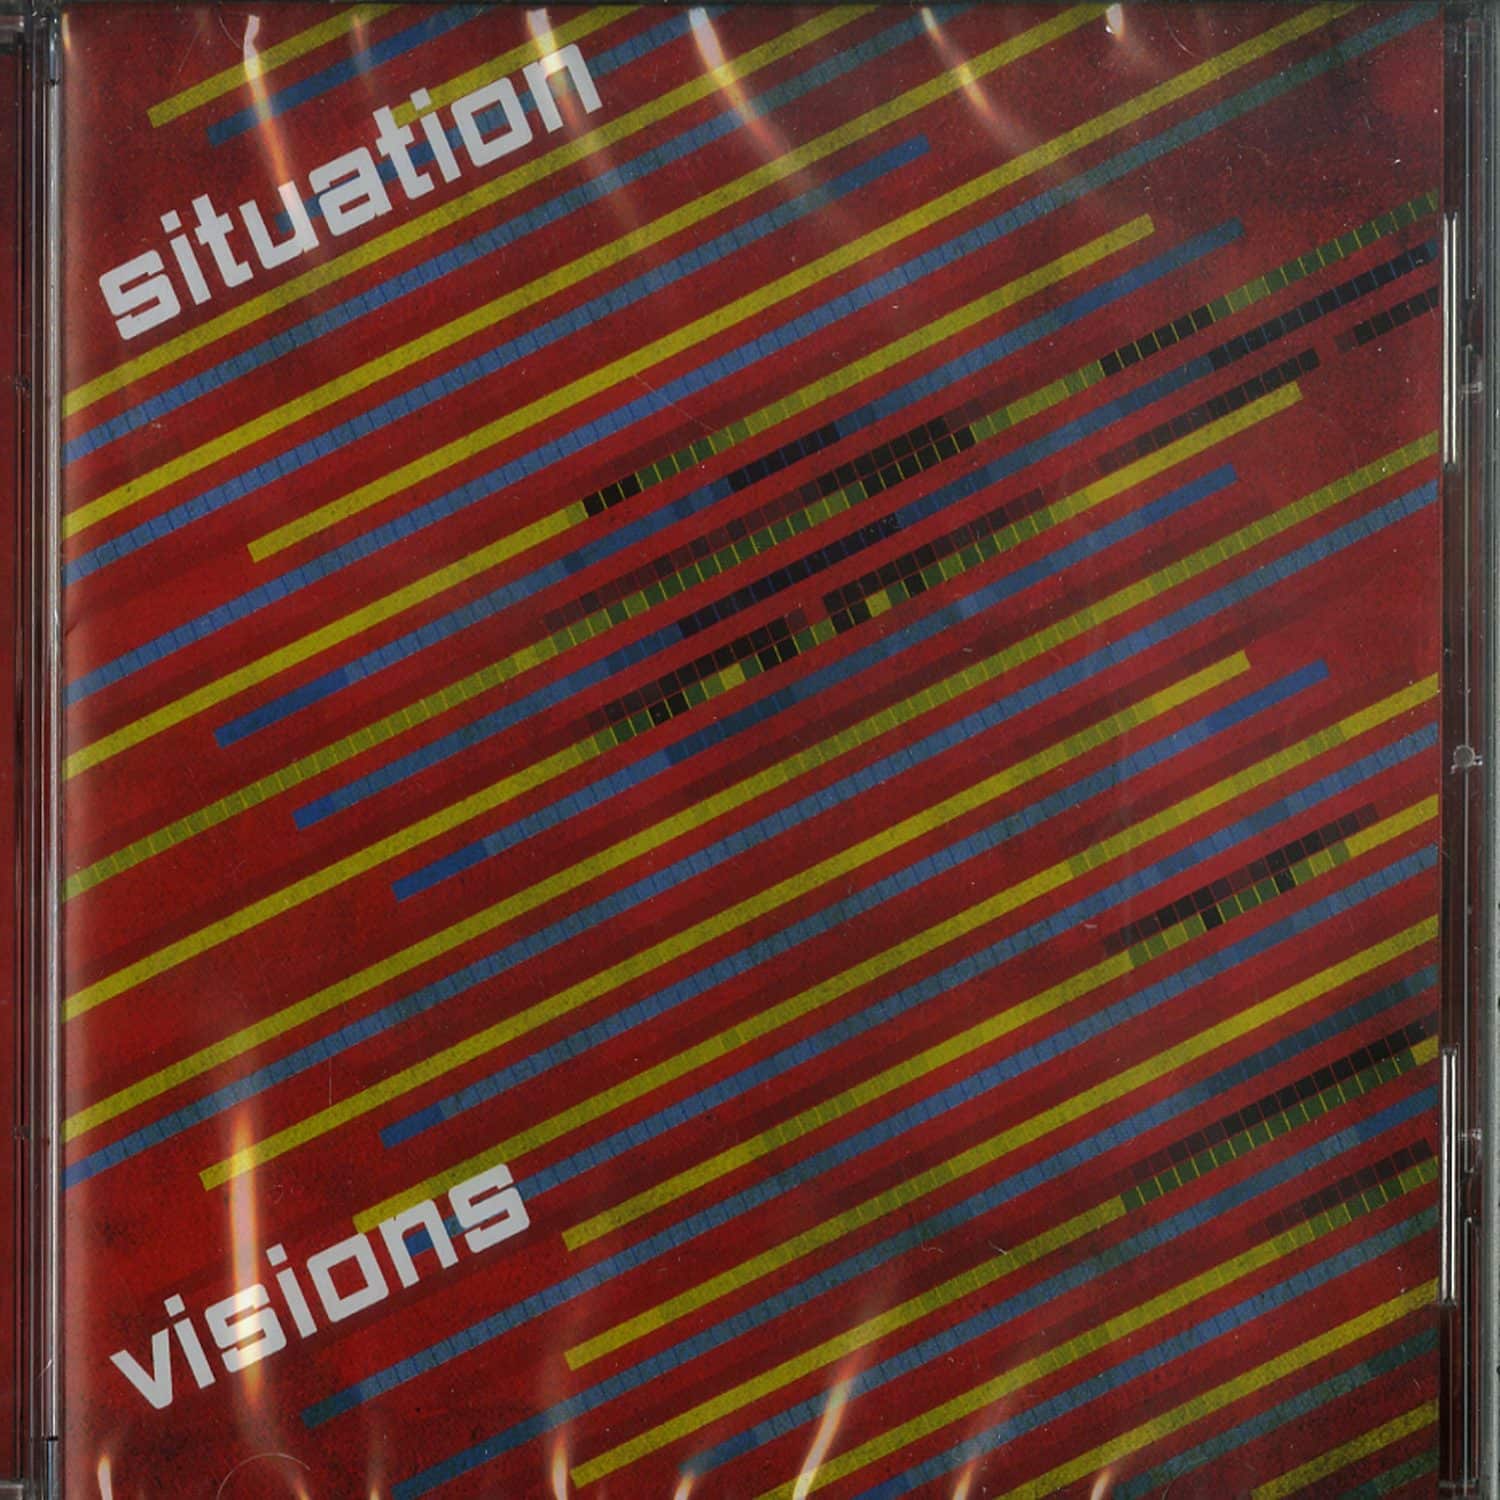 Situation - VISIONS 